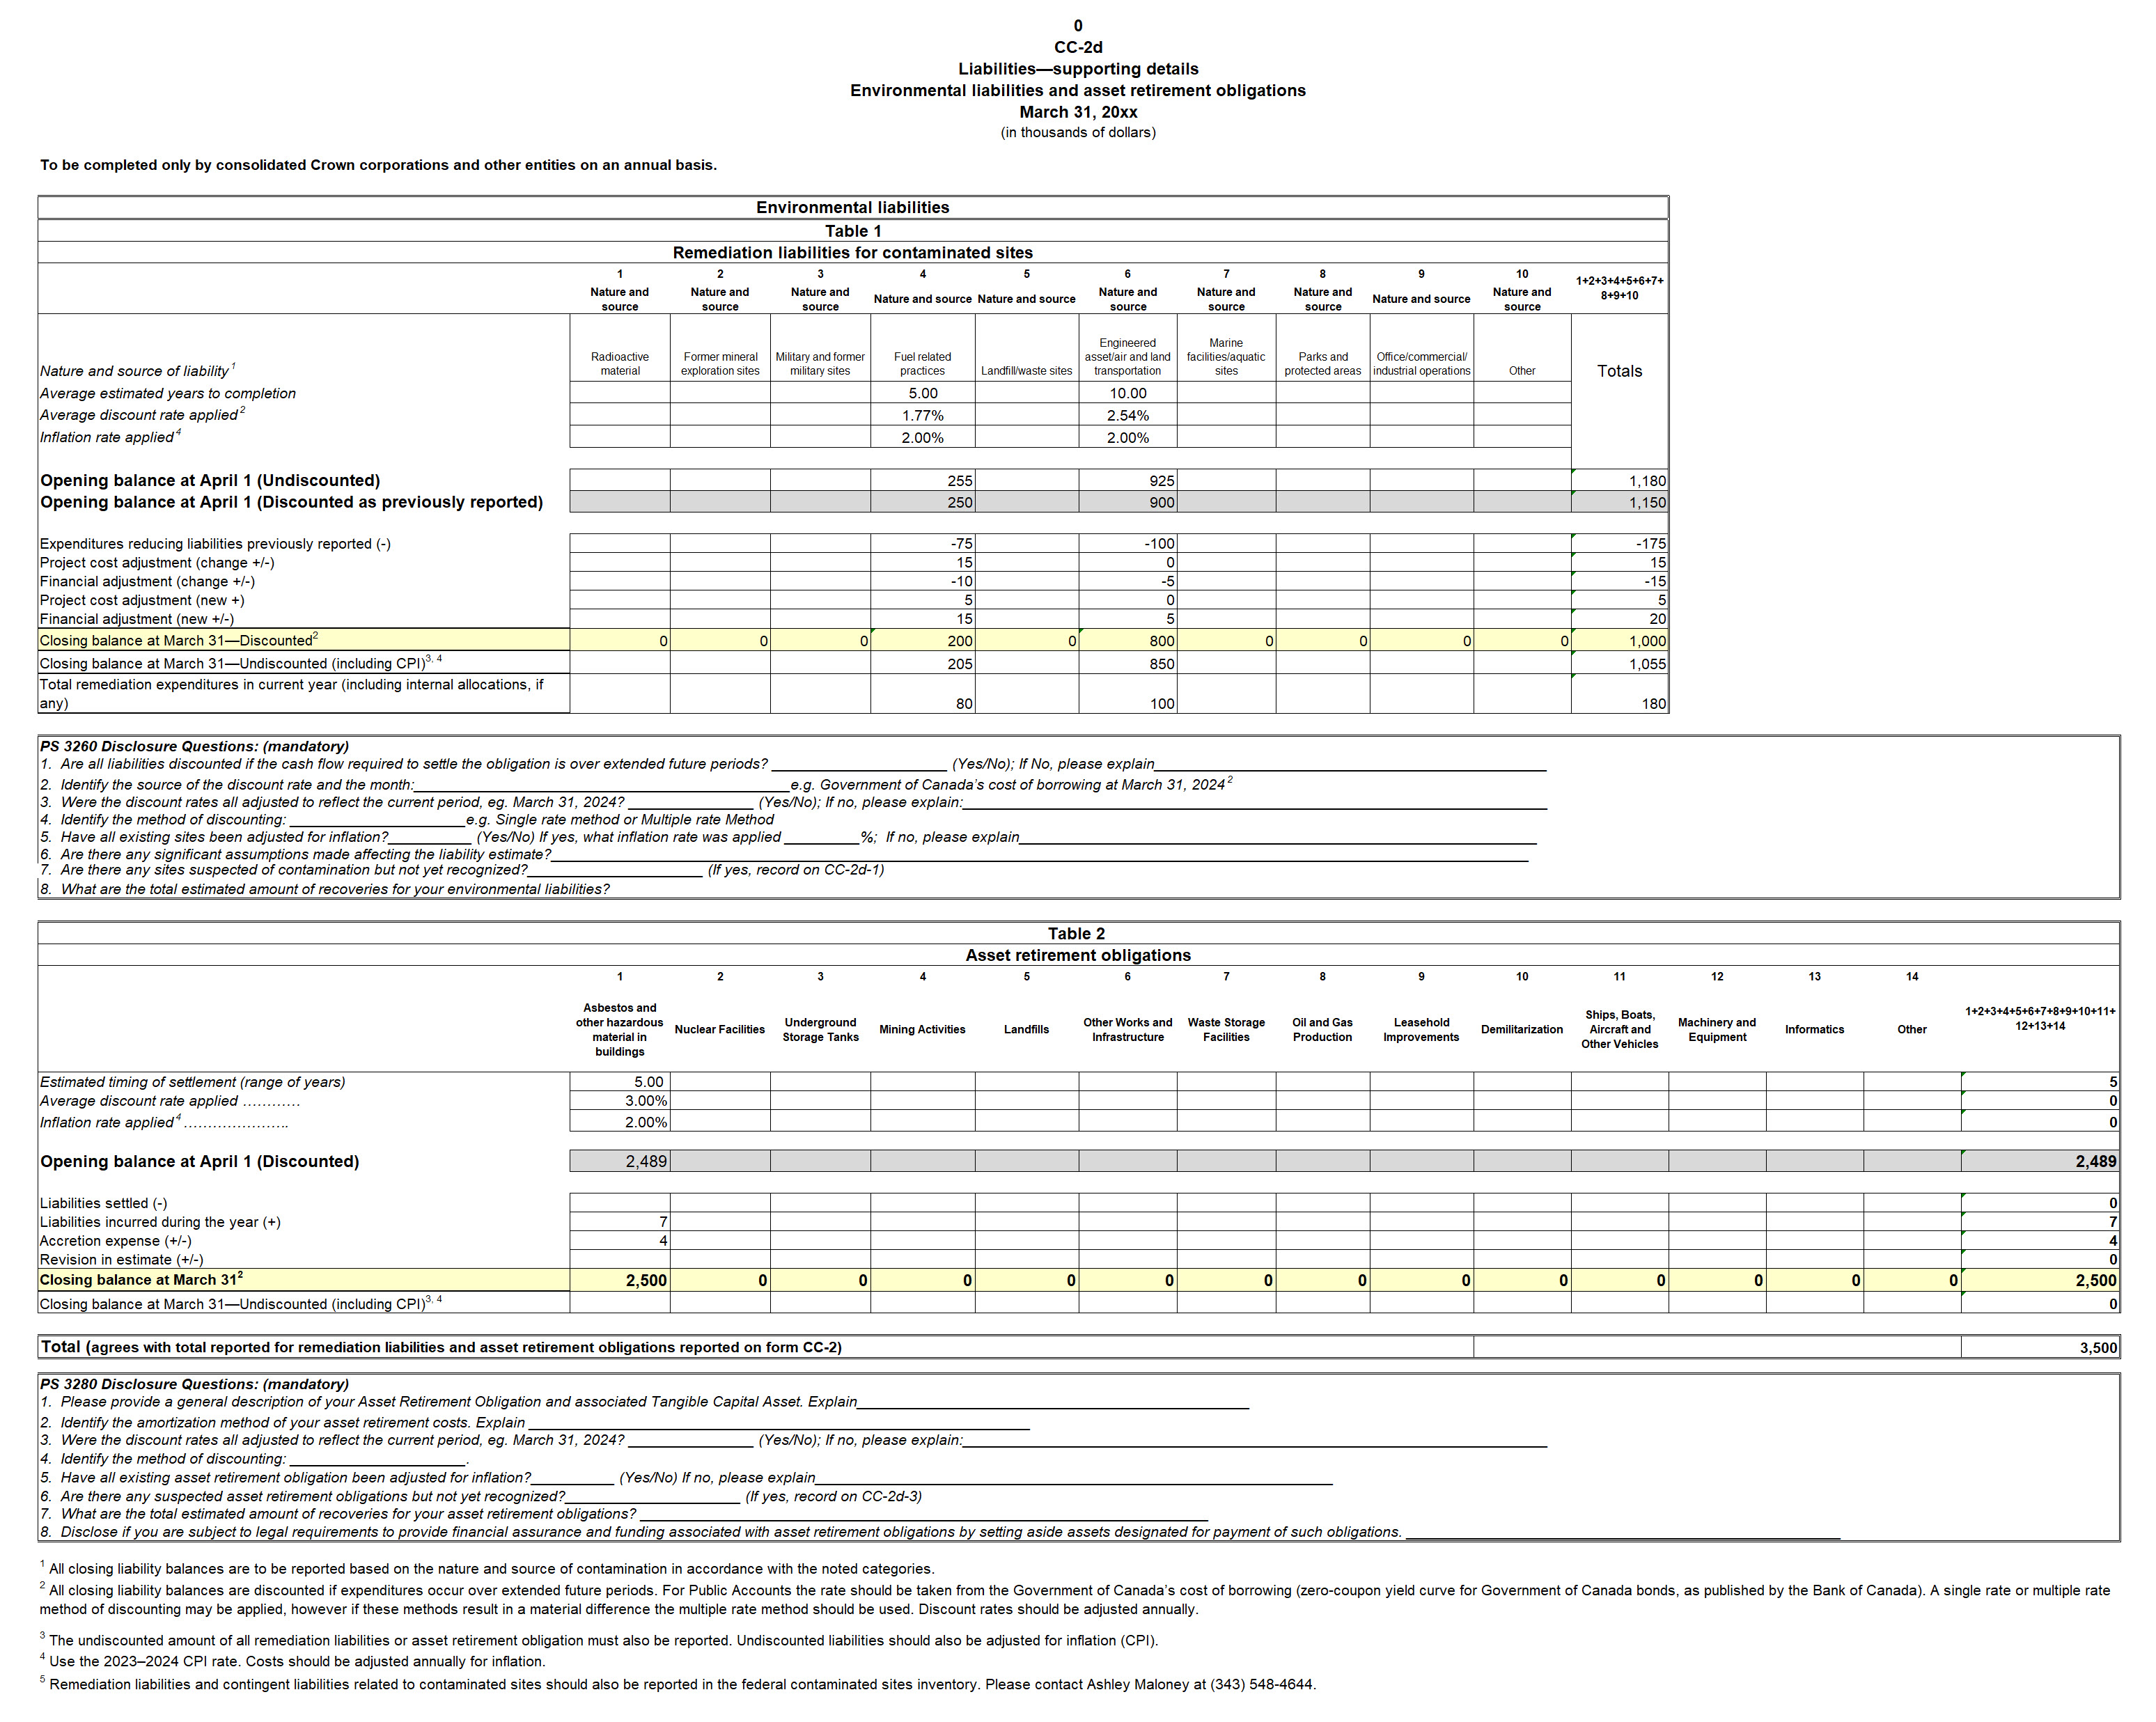 Screen capture of Form CC-2d: Liabilities—Supporting details - Text version below the image